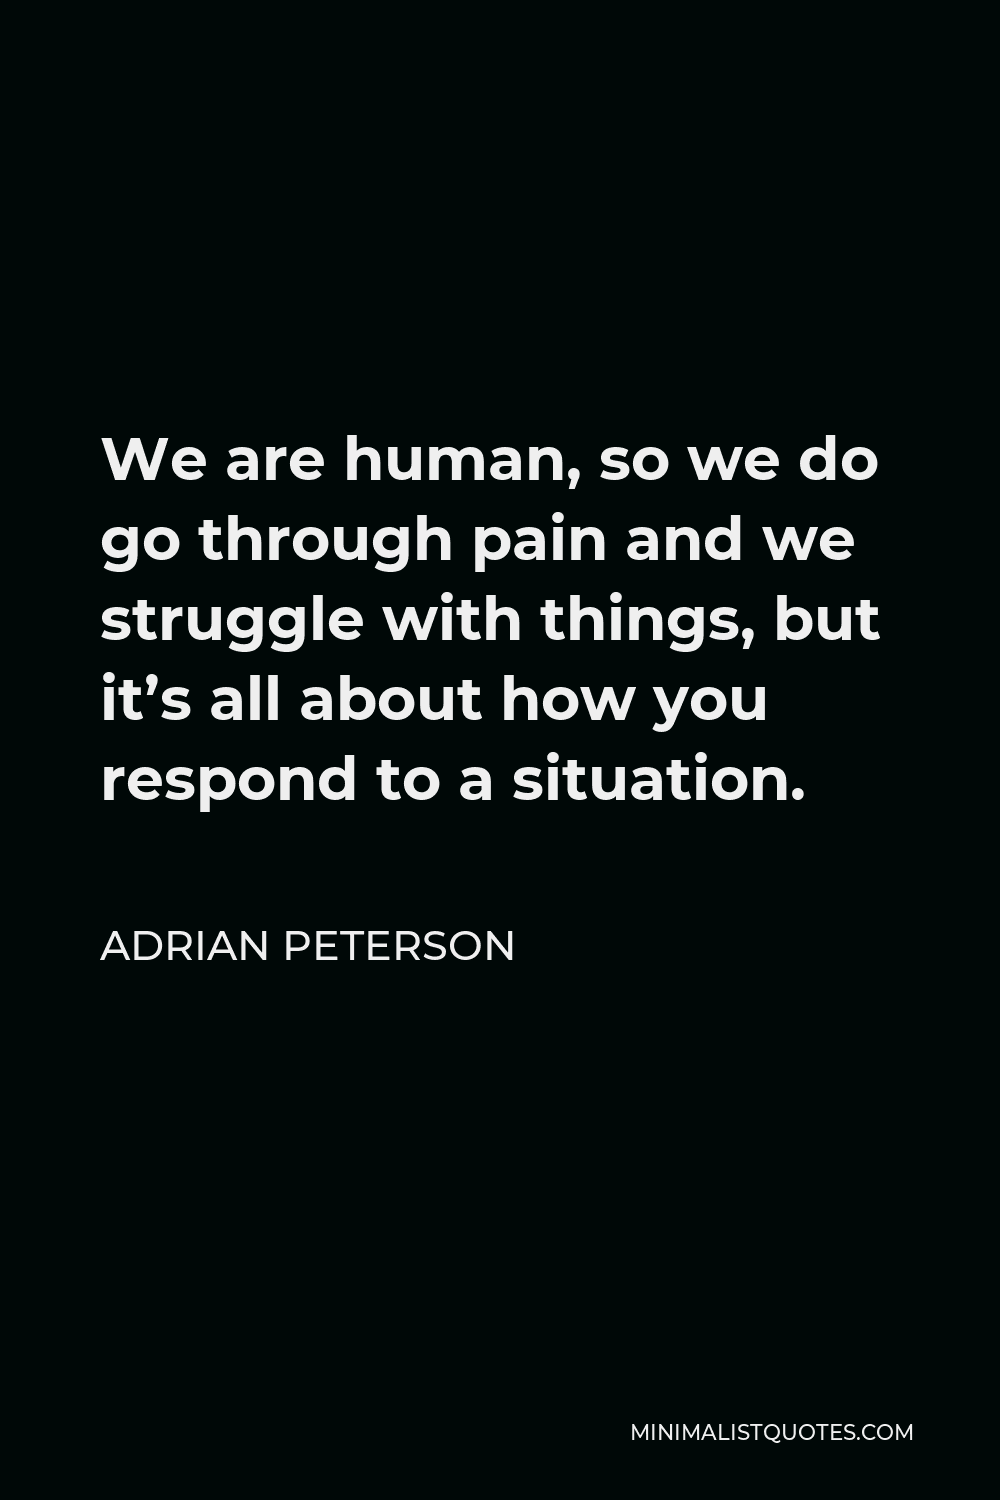 Adrian Peterson Quote - We are human, so we do go through pain and we struggle with things, but it’s all about how you respond to a situation.